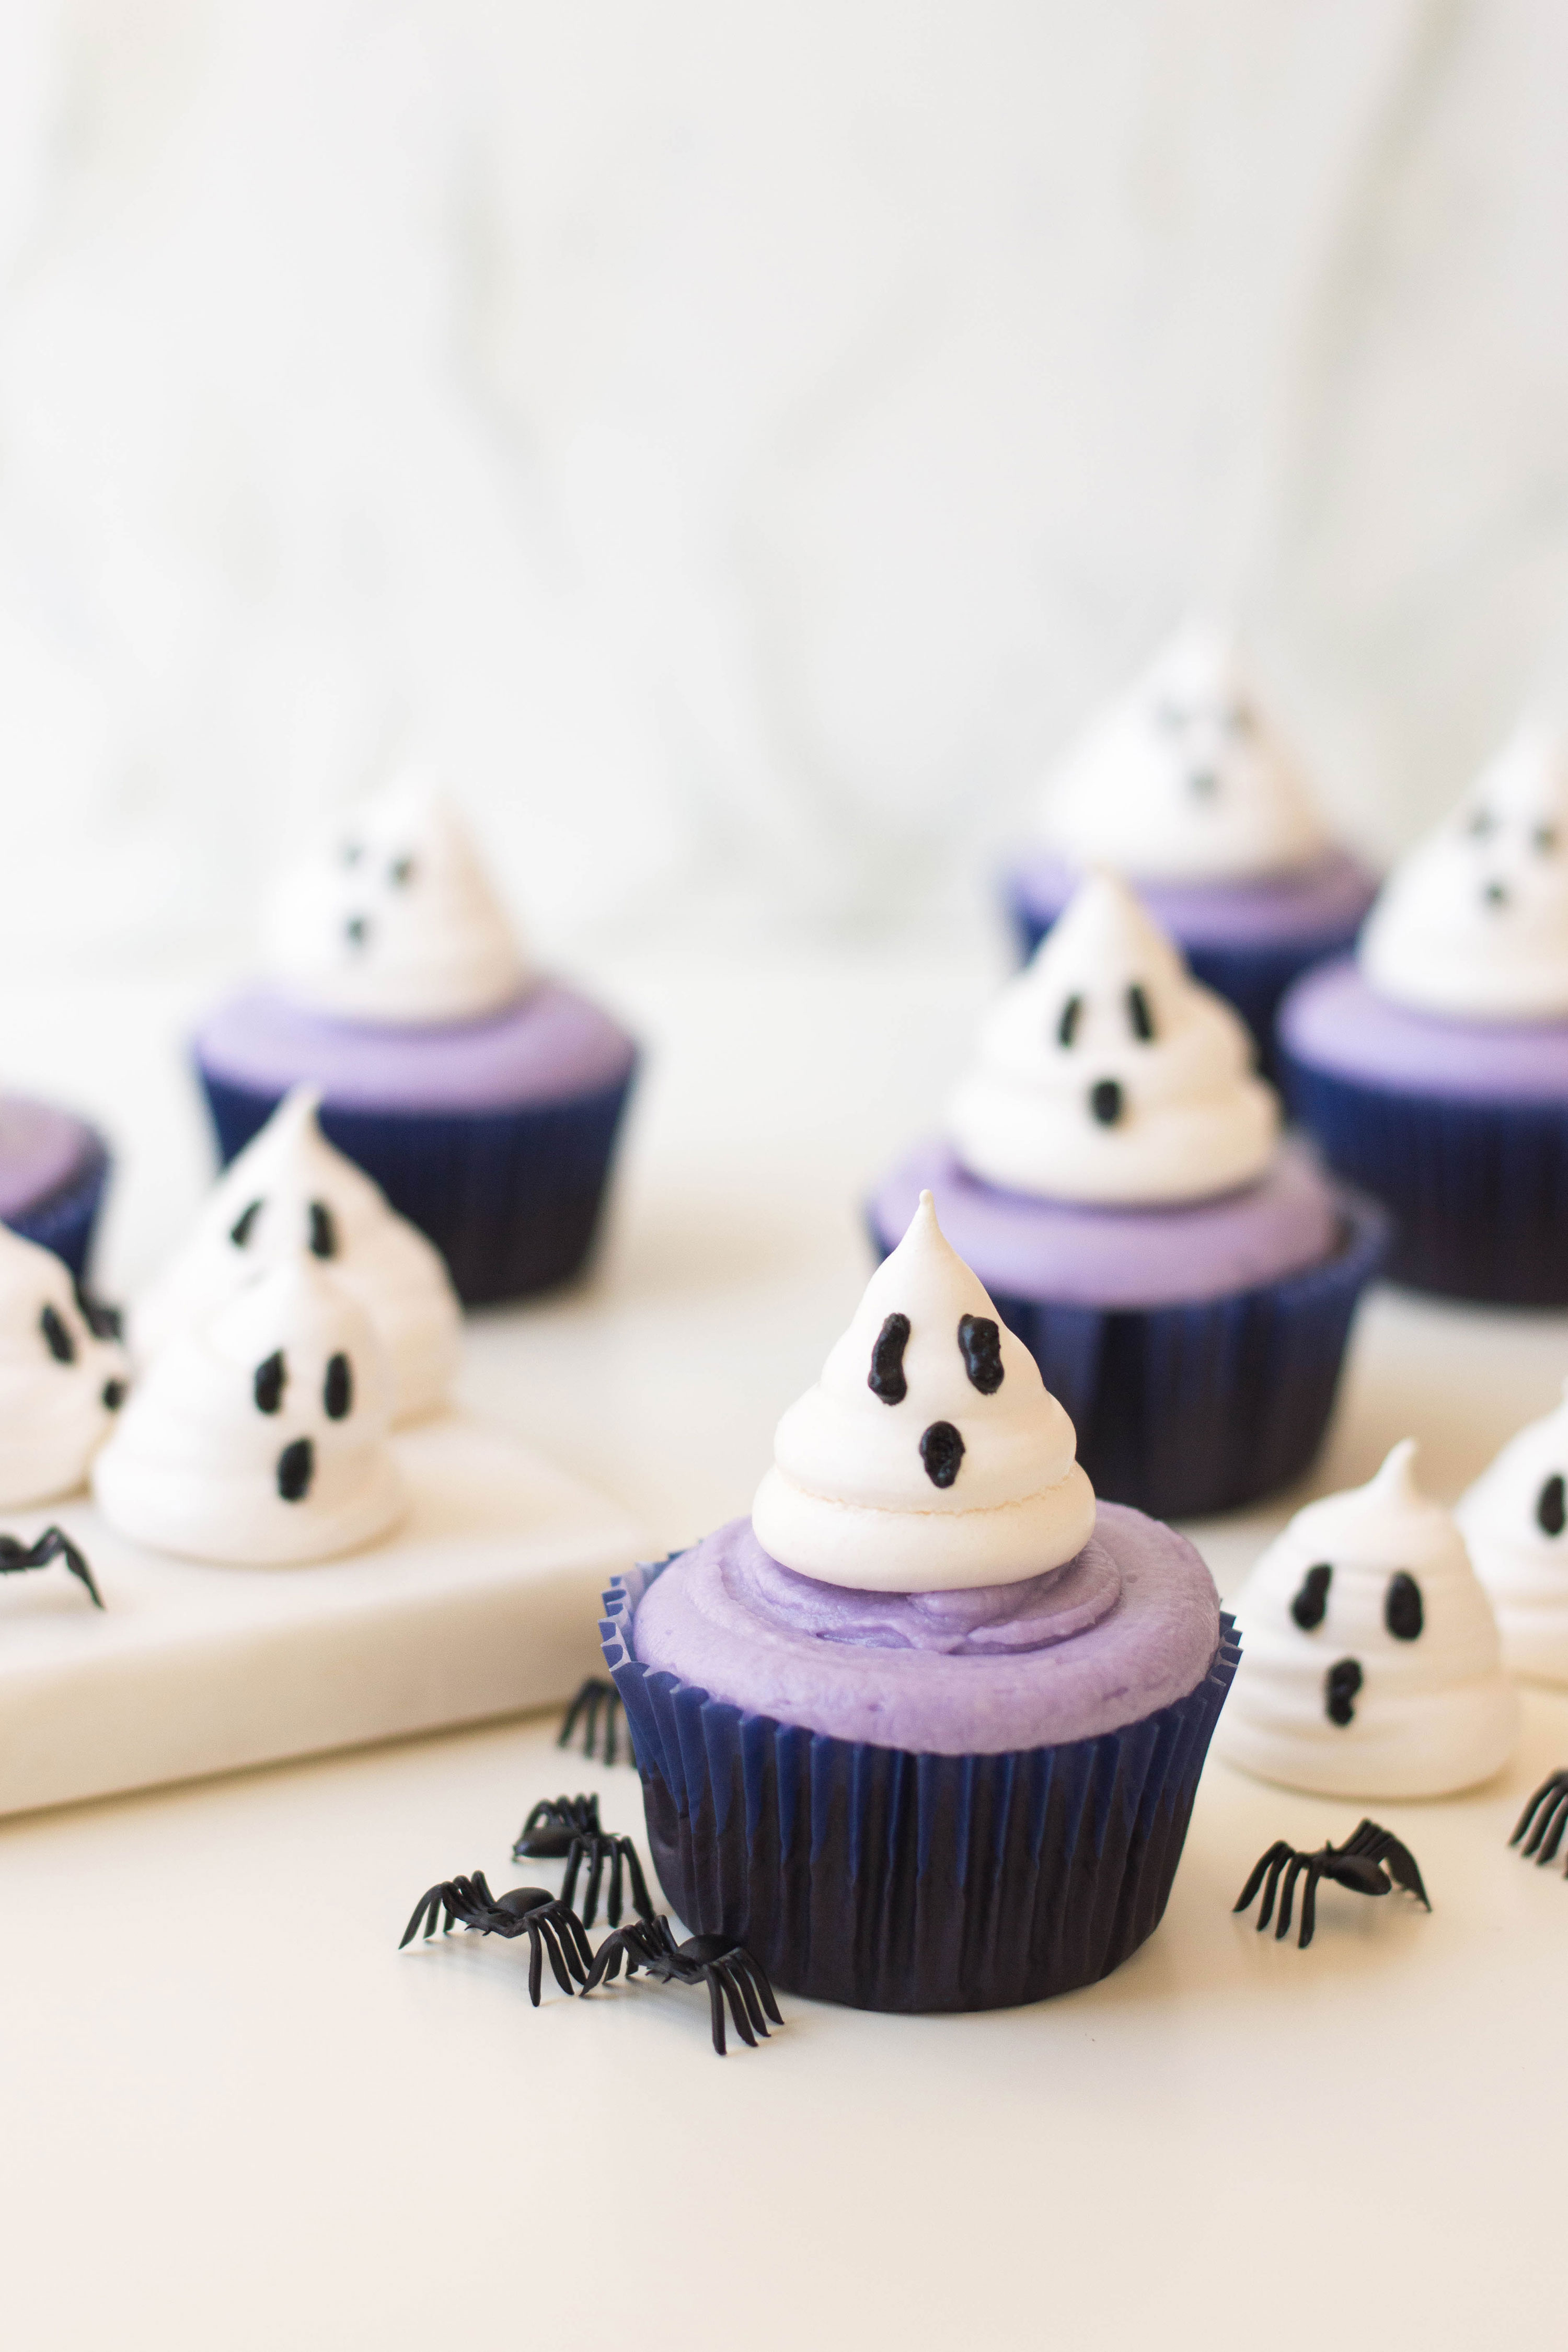 Meringue cookies take a new twist with these delicious (and oh-so adorable) Ghost Cupcakes. They're perfect for Halloween because their ghoulish AND sweet! #halloweencupcakes